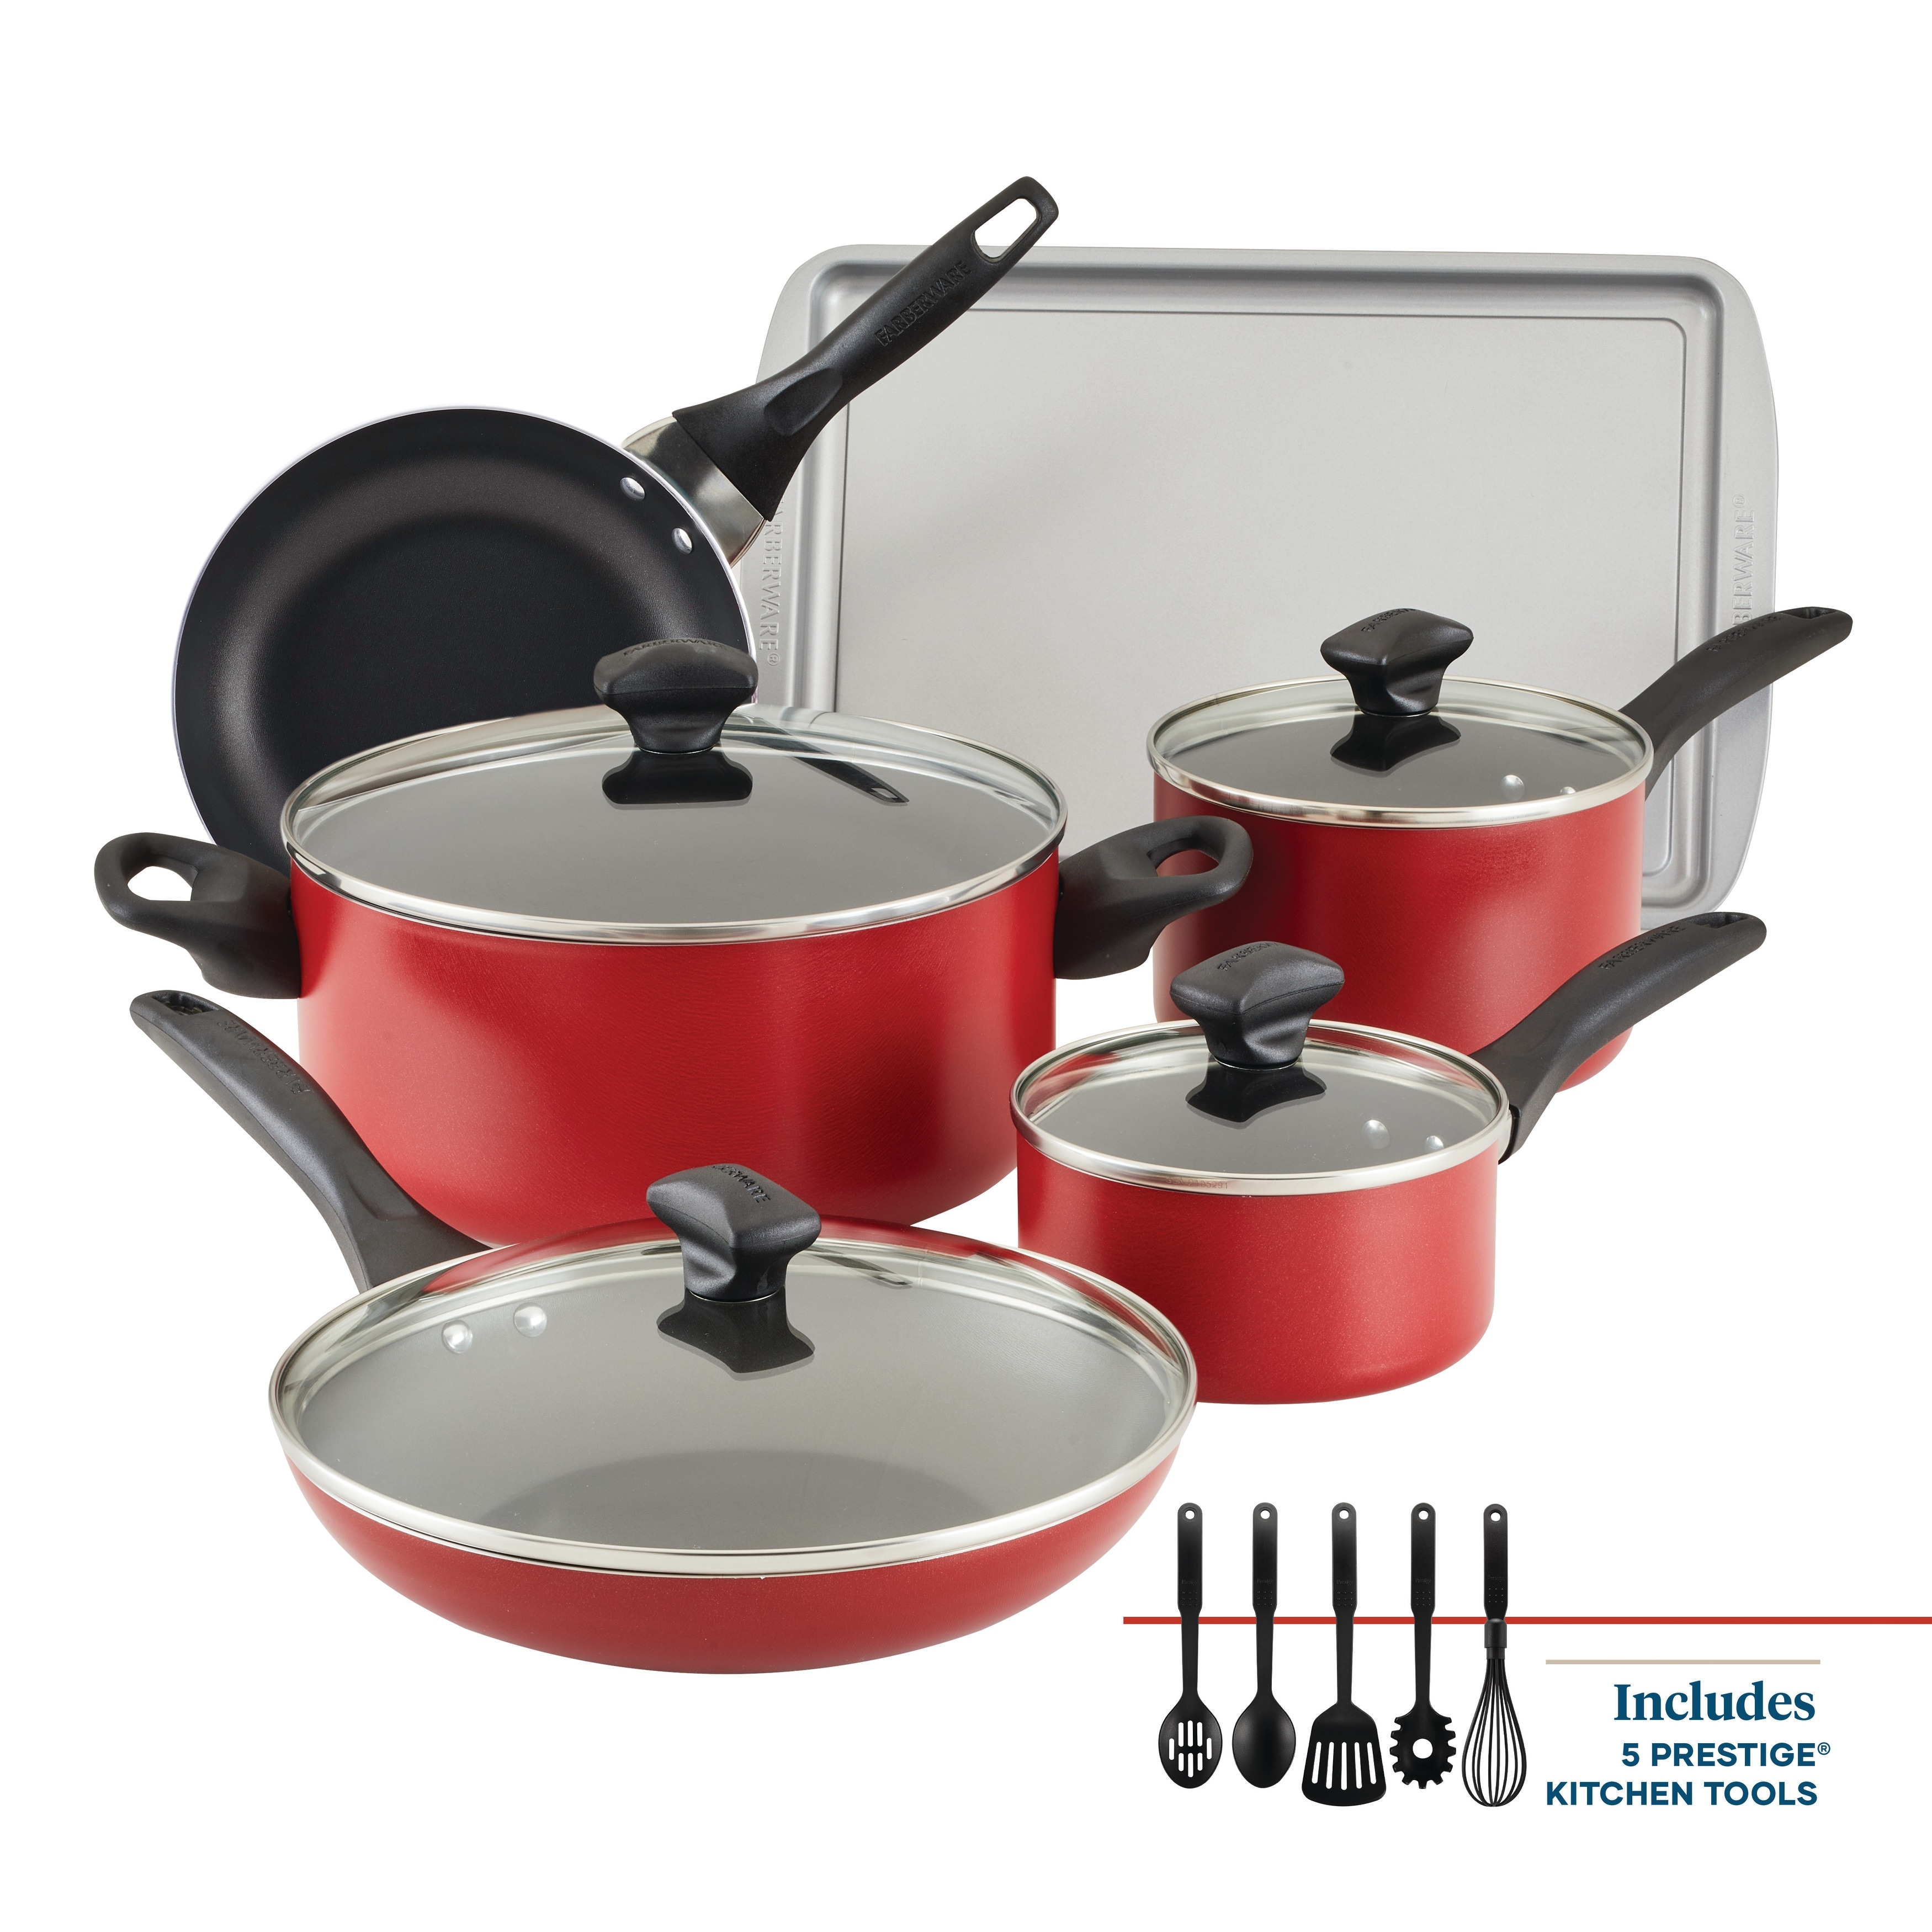 T-fal Excite Nonstick Cookware Set 14 Piece Oven Safe 350F Pots and Pans,  Dishwasher Safe Red